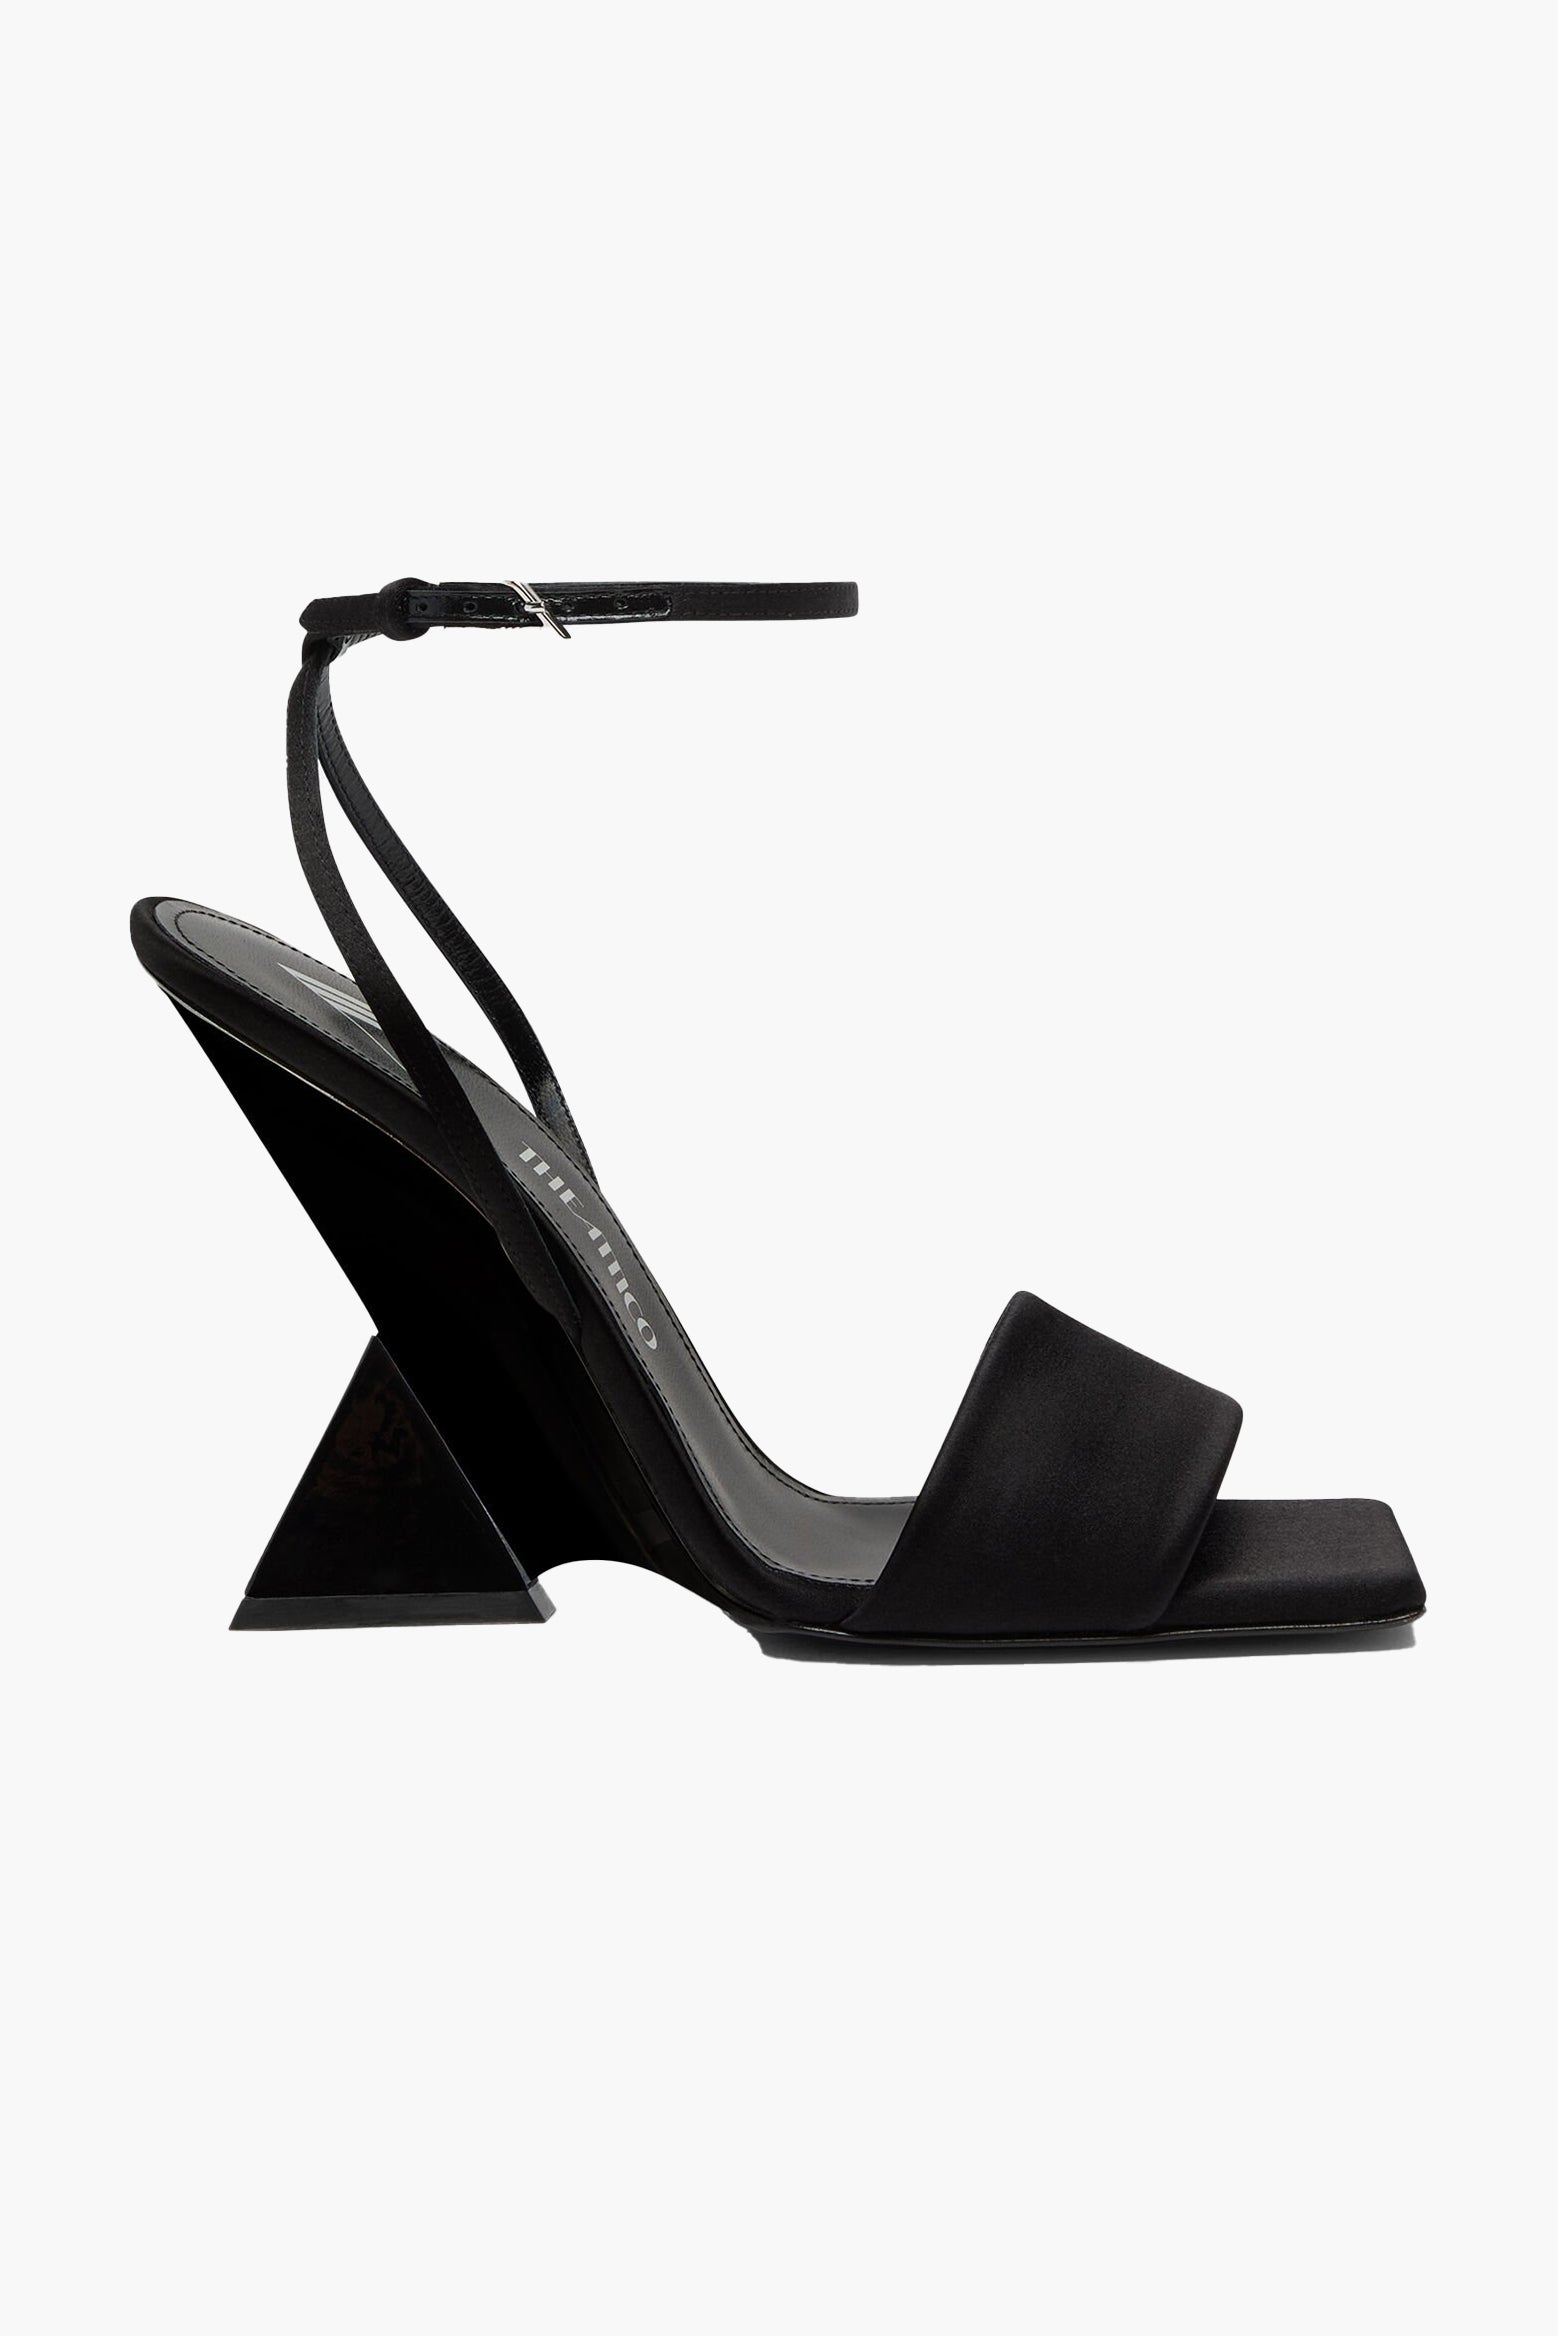 The Attico Cheope Sandal in Black available at The New Trend Australia